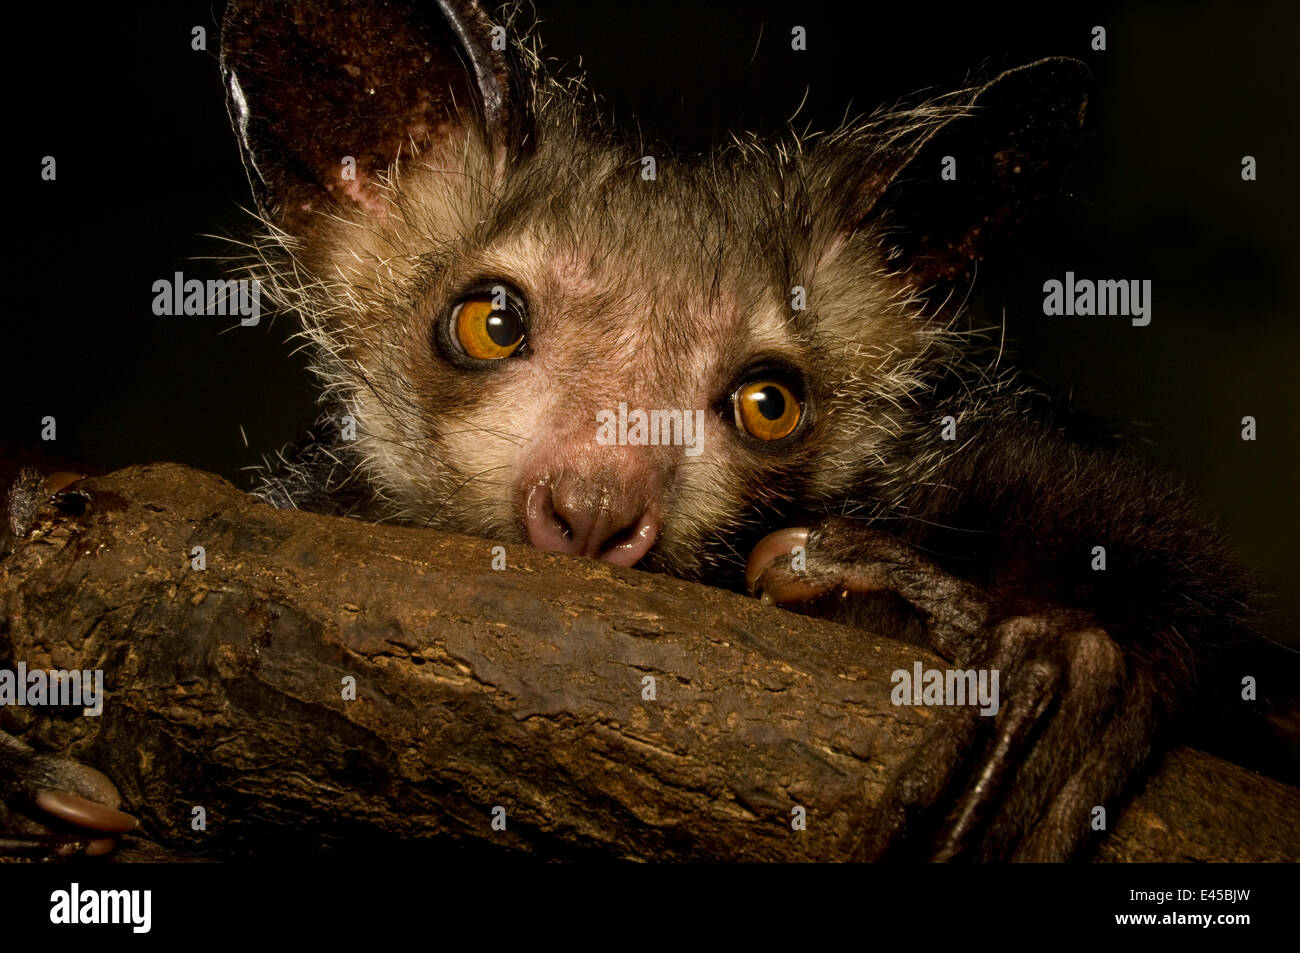 Aye-aye (Daubentonia madagascariensis) extracting beetle grubs from wood. Endemic to Madagascar. Photographed under controlled conditions at Durrell Wildlife Conservation Trust, Jersey, UK. captive Stock Photo